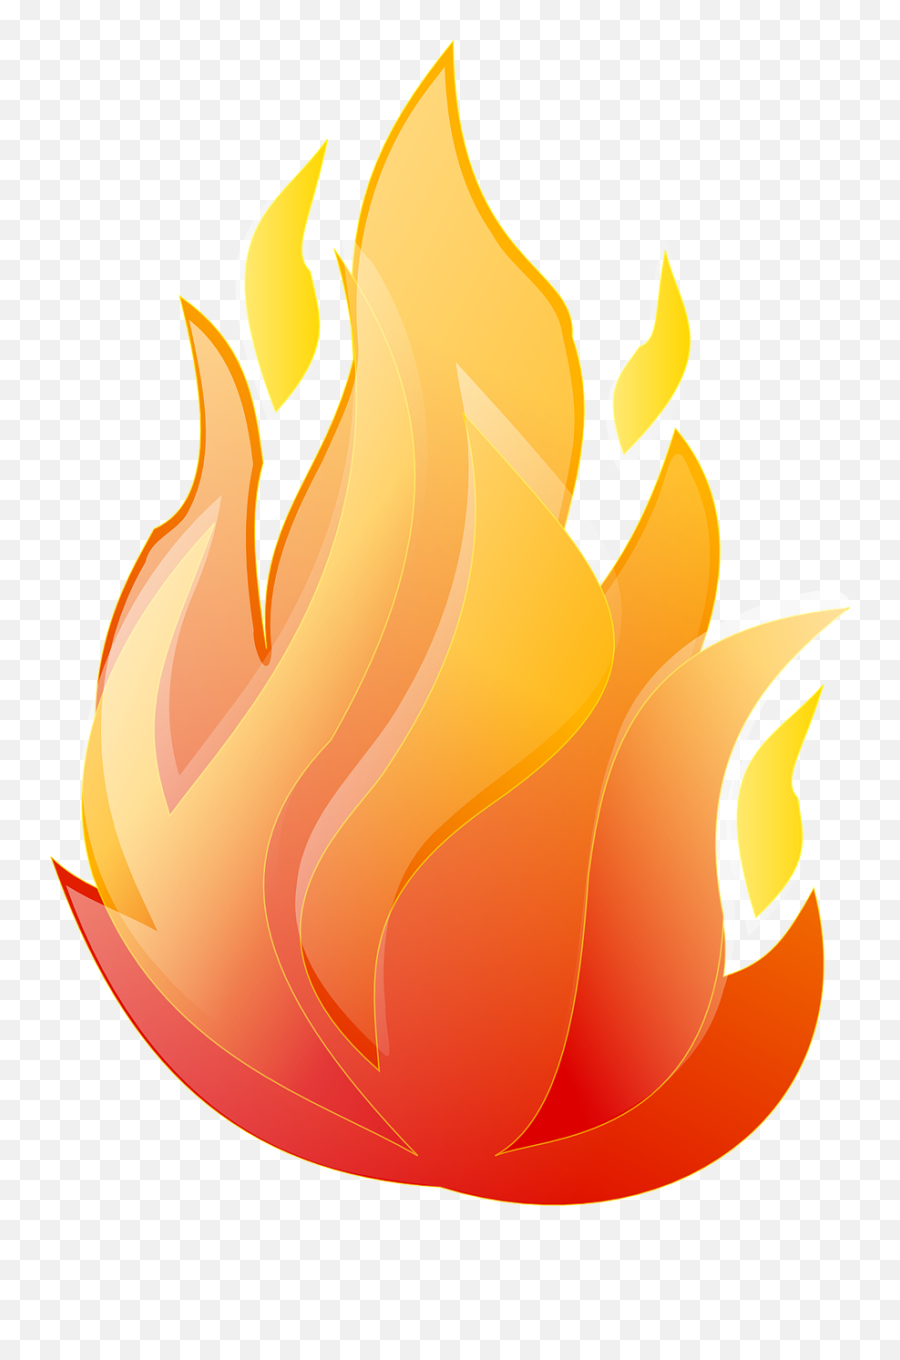 Flames Clip Art Vector Download At Image 9 - Clipartix Animated Transparent Background Fire Emoji,Flaming Hot Emoticon